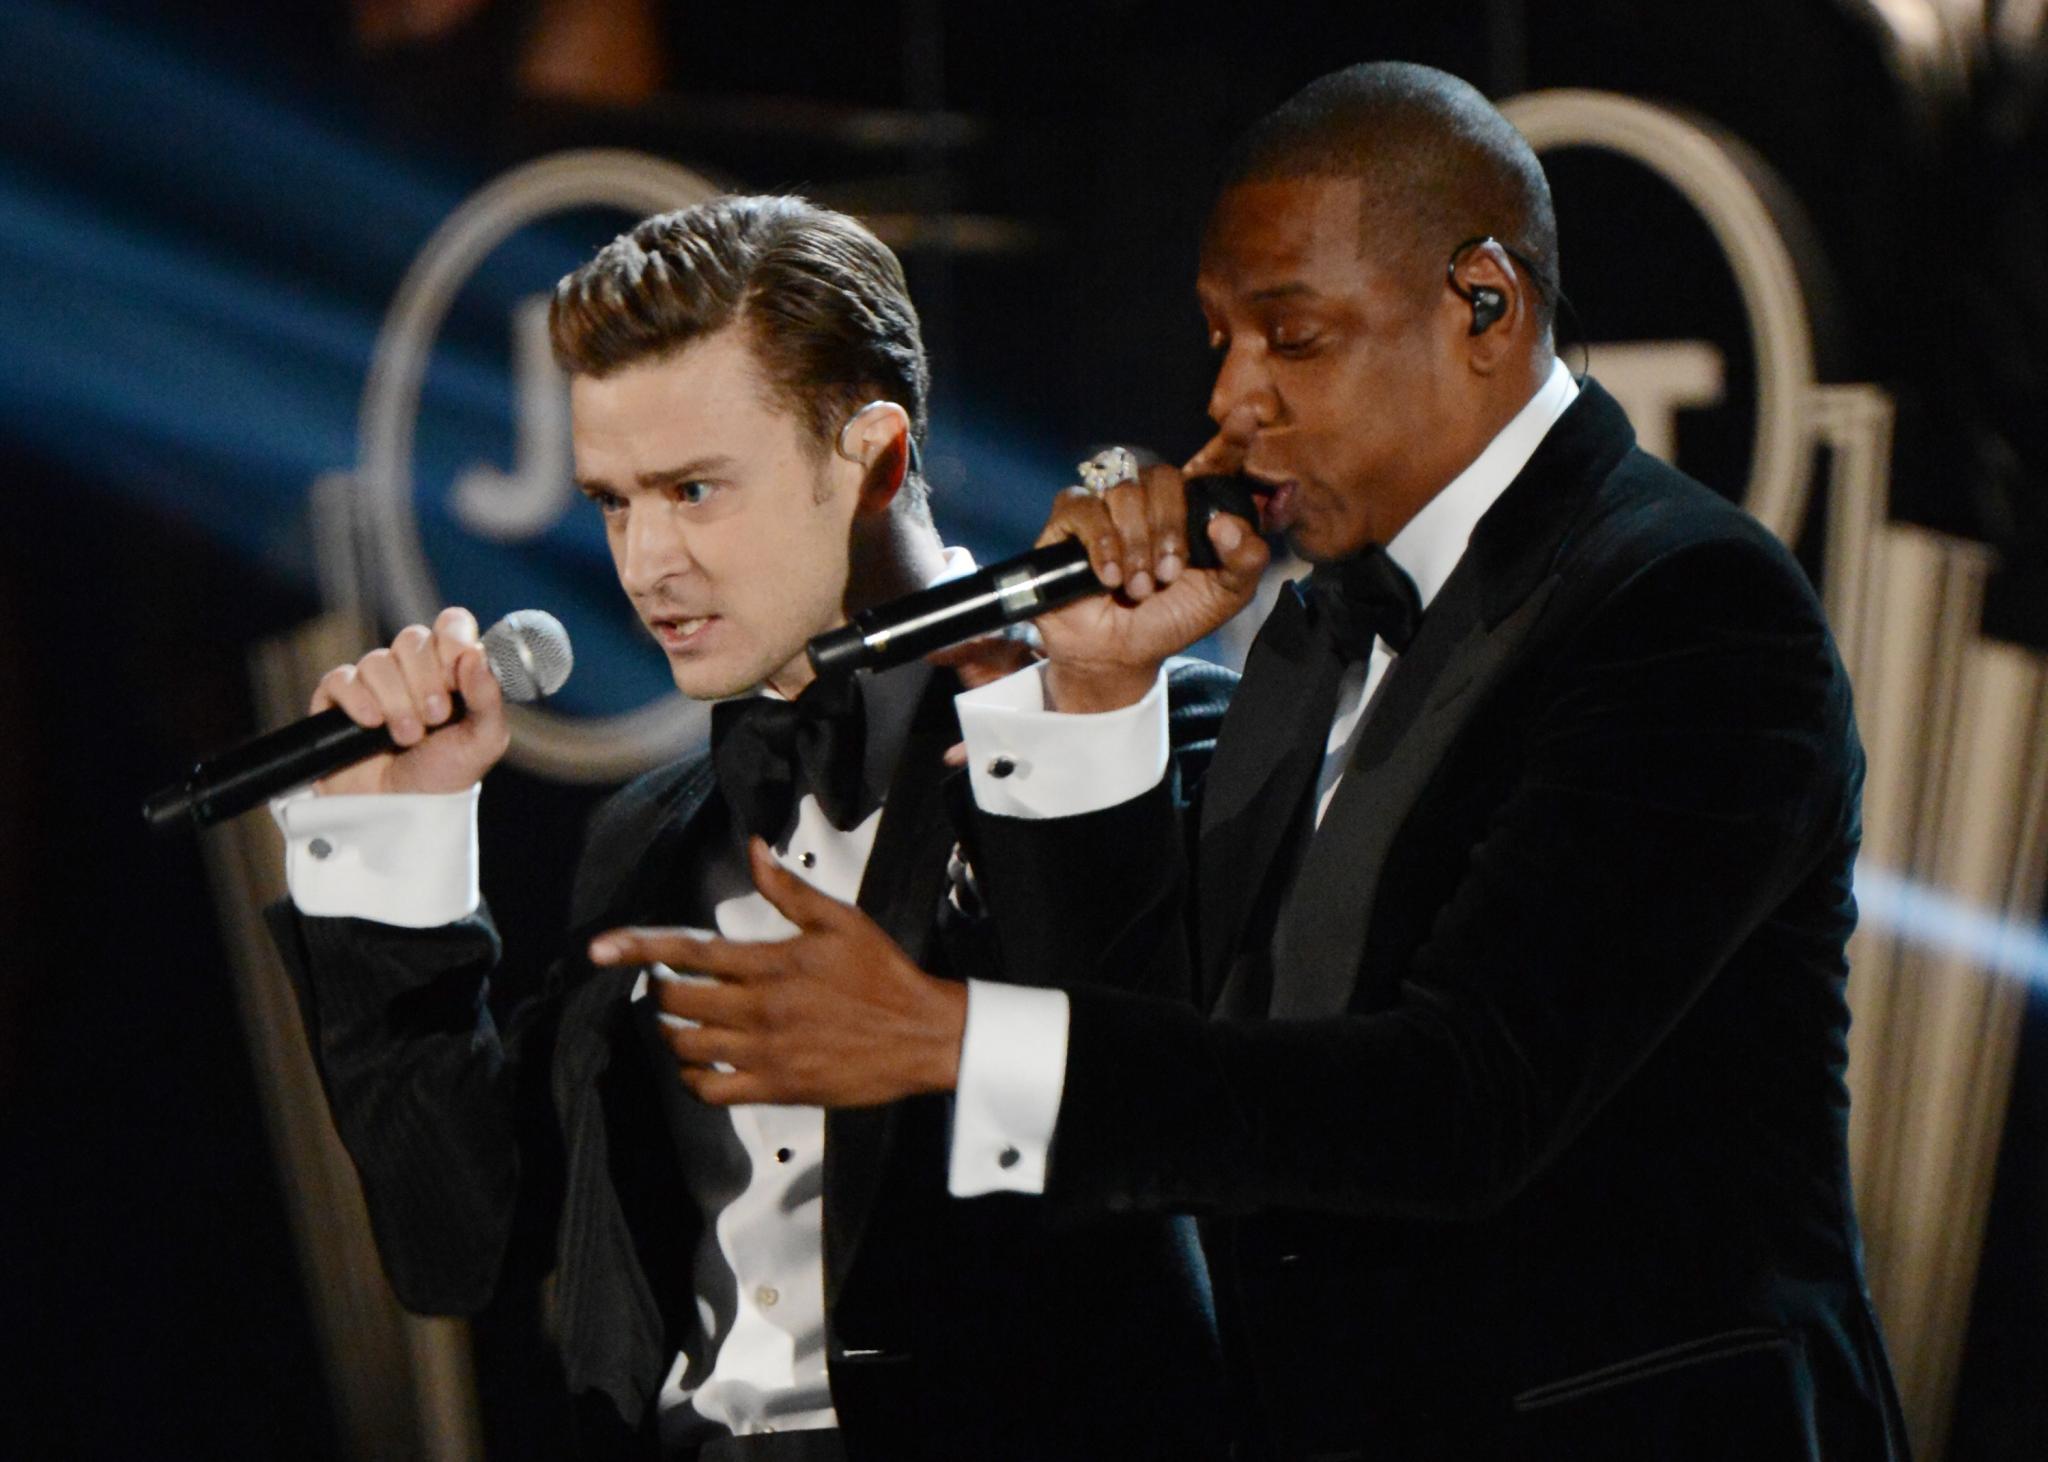 See Justin Timberlake and Jay-Z's New Video 'Suit & Tie'